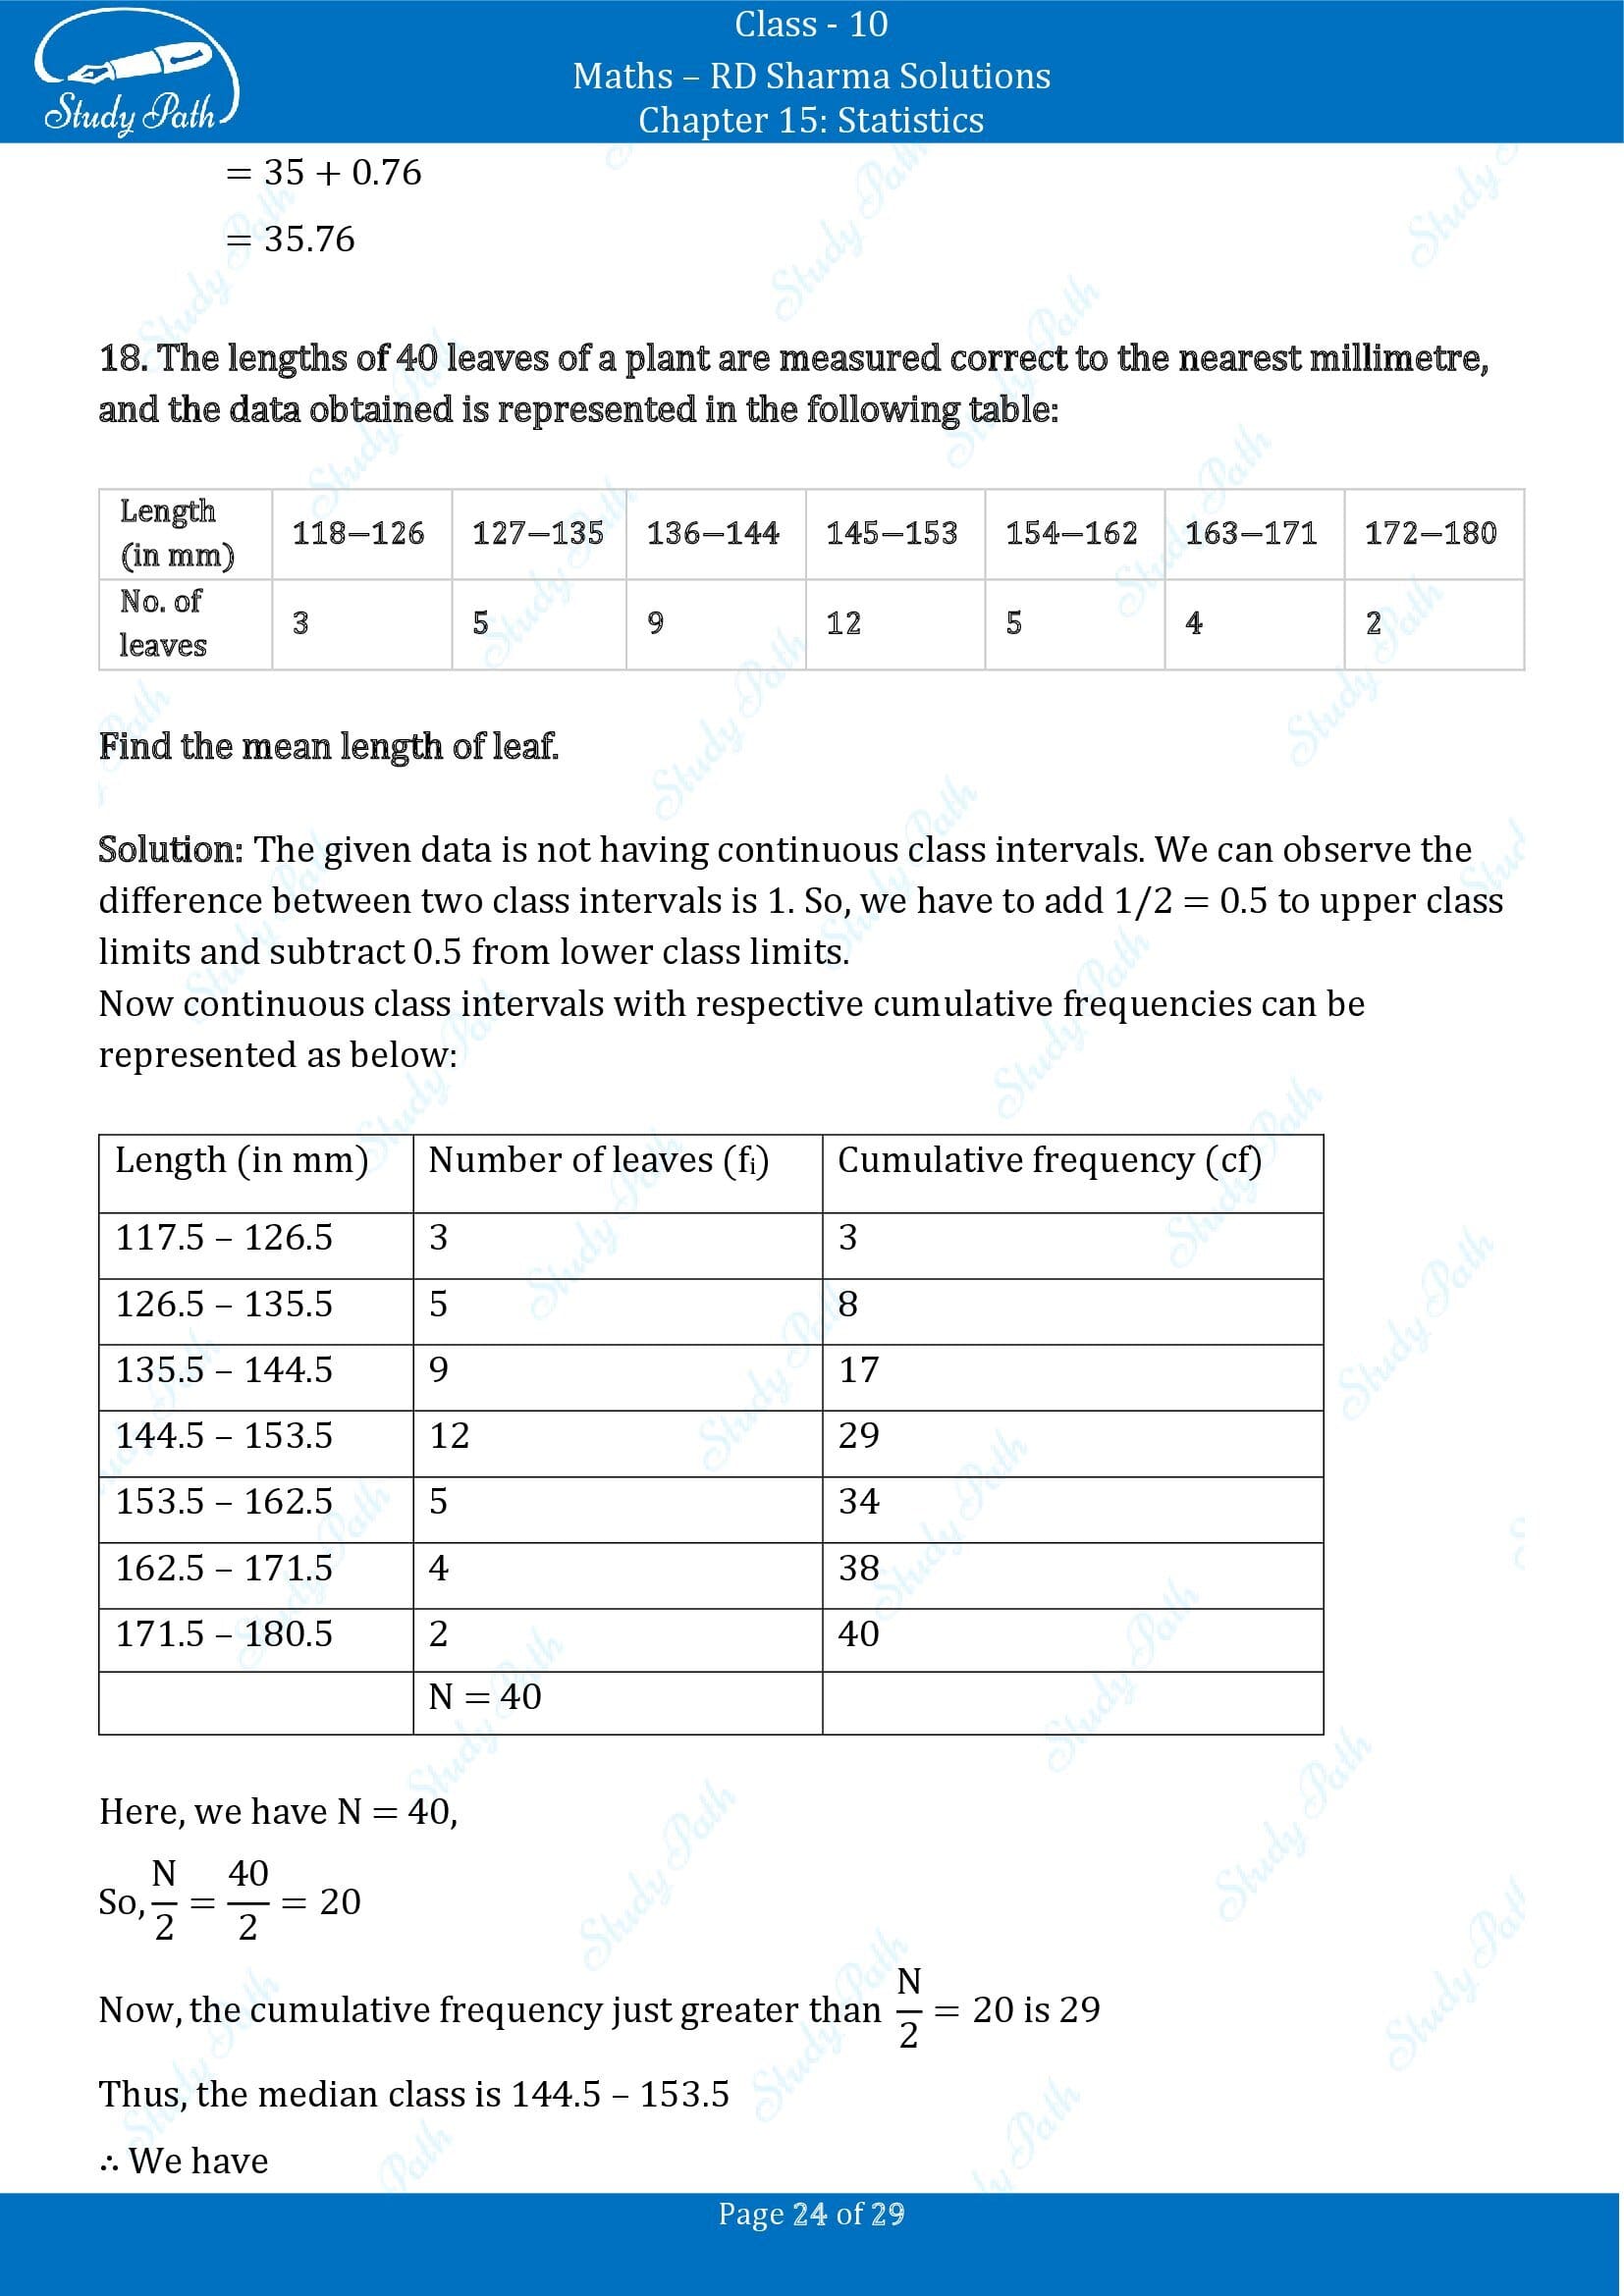 RD Sharma Solutions Class 10 Chapter 15 Statistics Exercise 15.4 00024